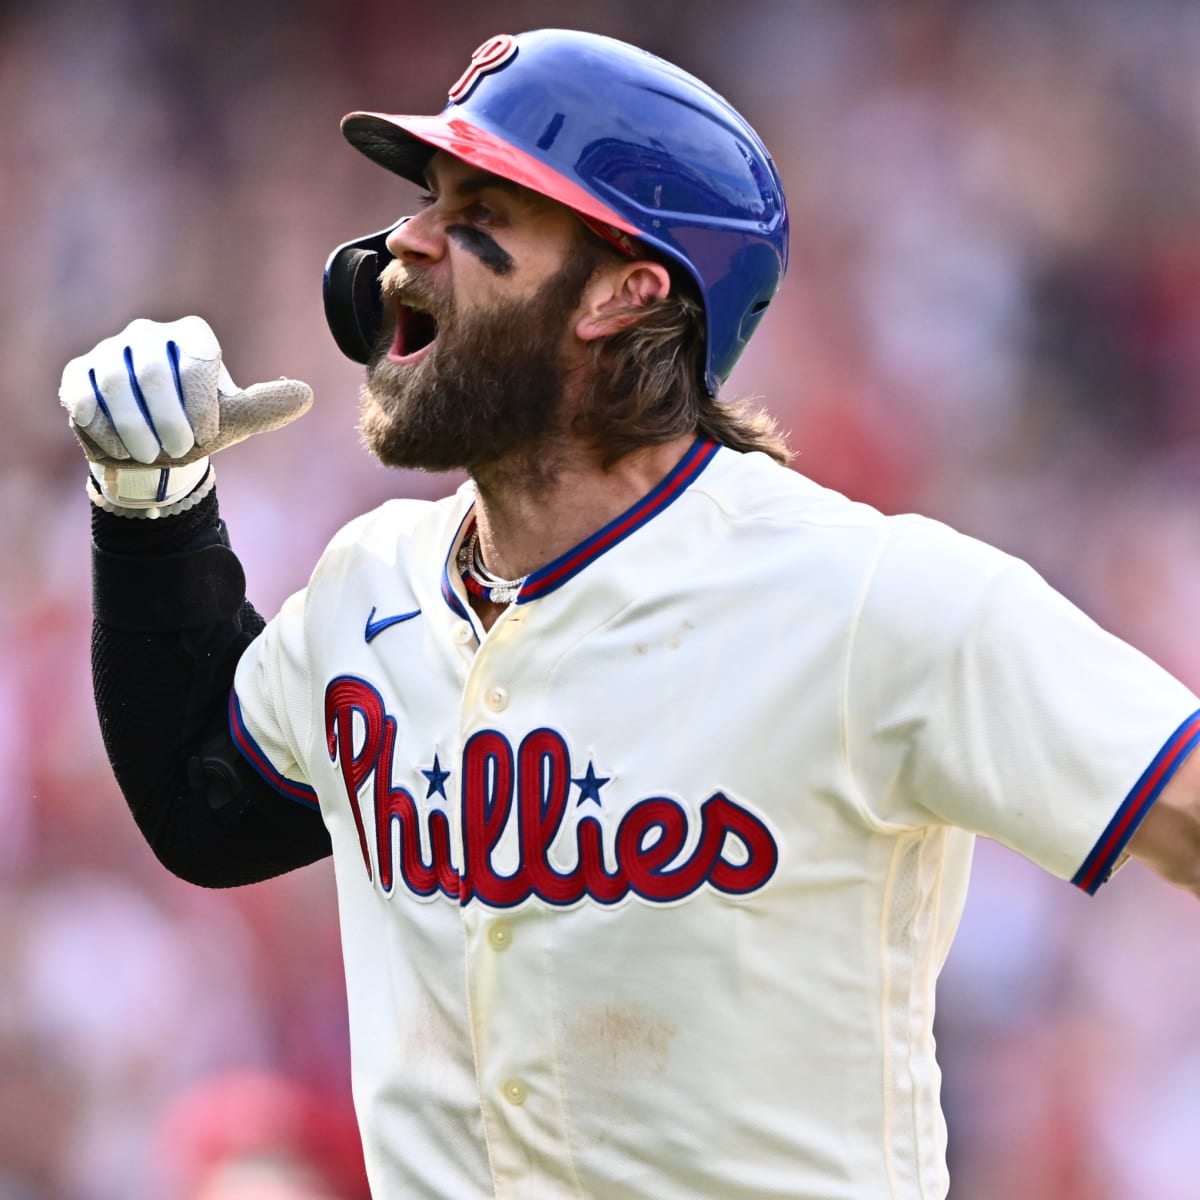 Phillies' Bryce Harper Blasts 300th Career Home Run - Sports Illustrated